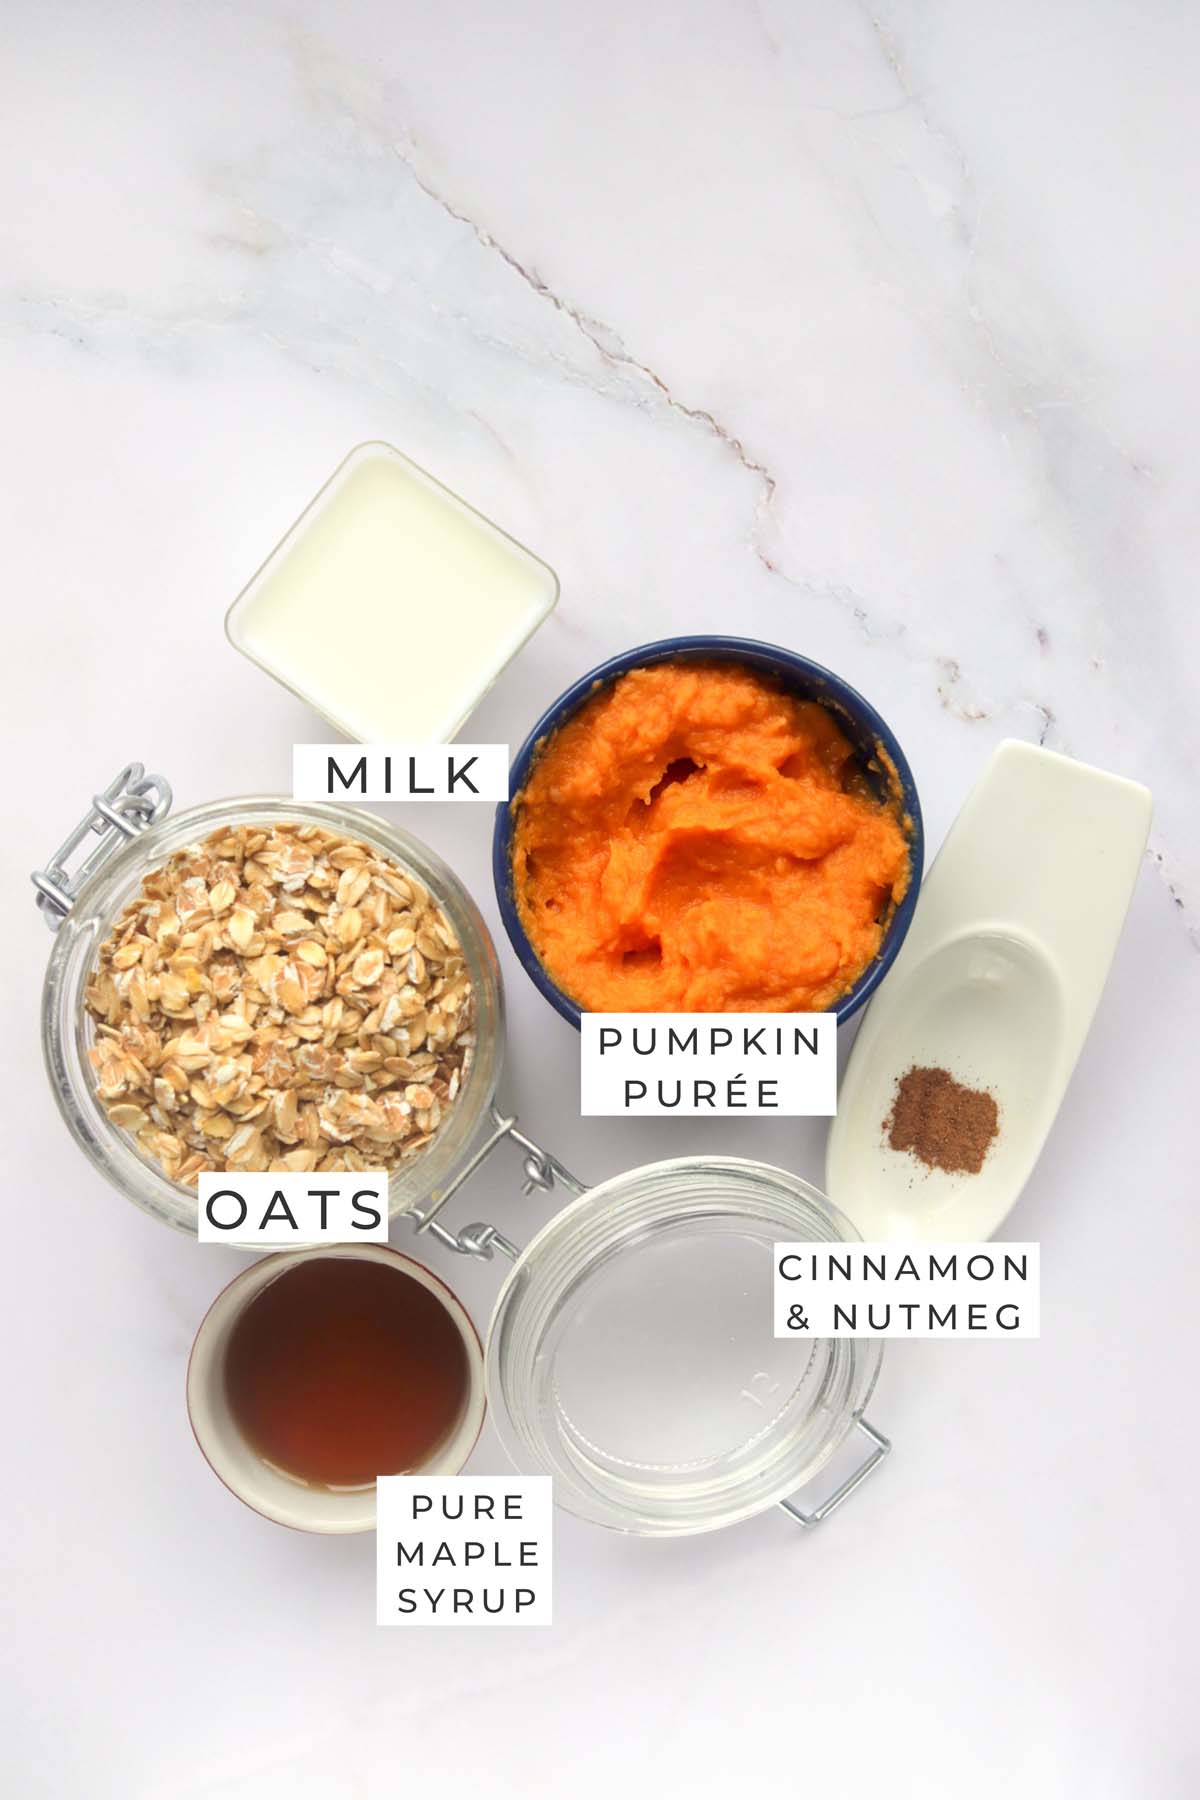 Labeled ingredients for the pumpkin oats.